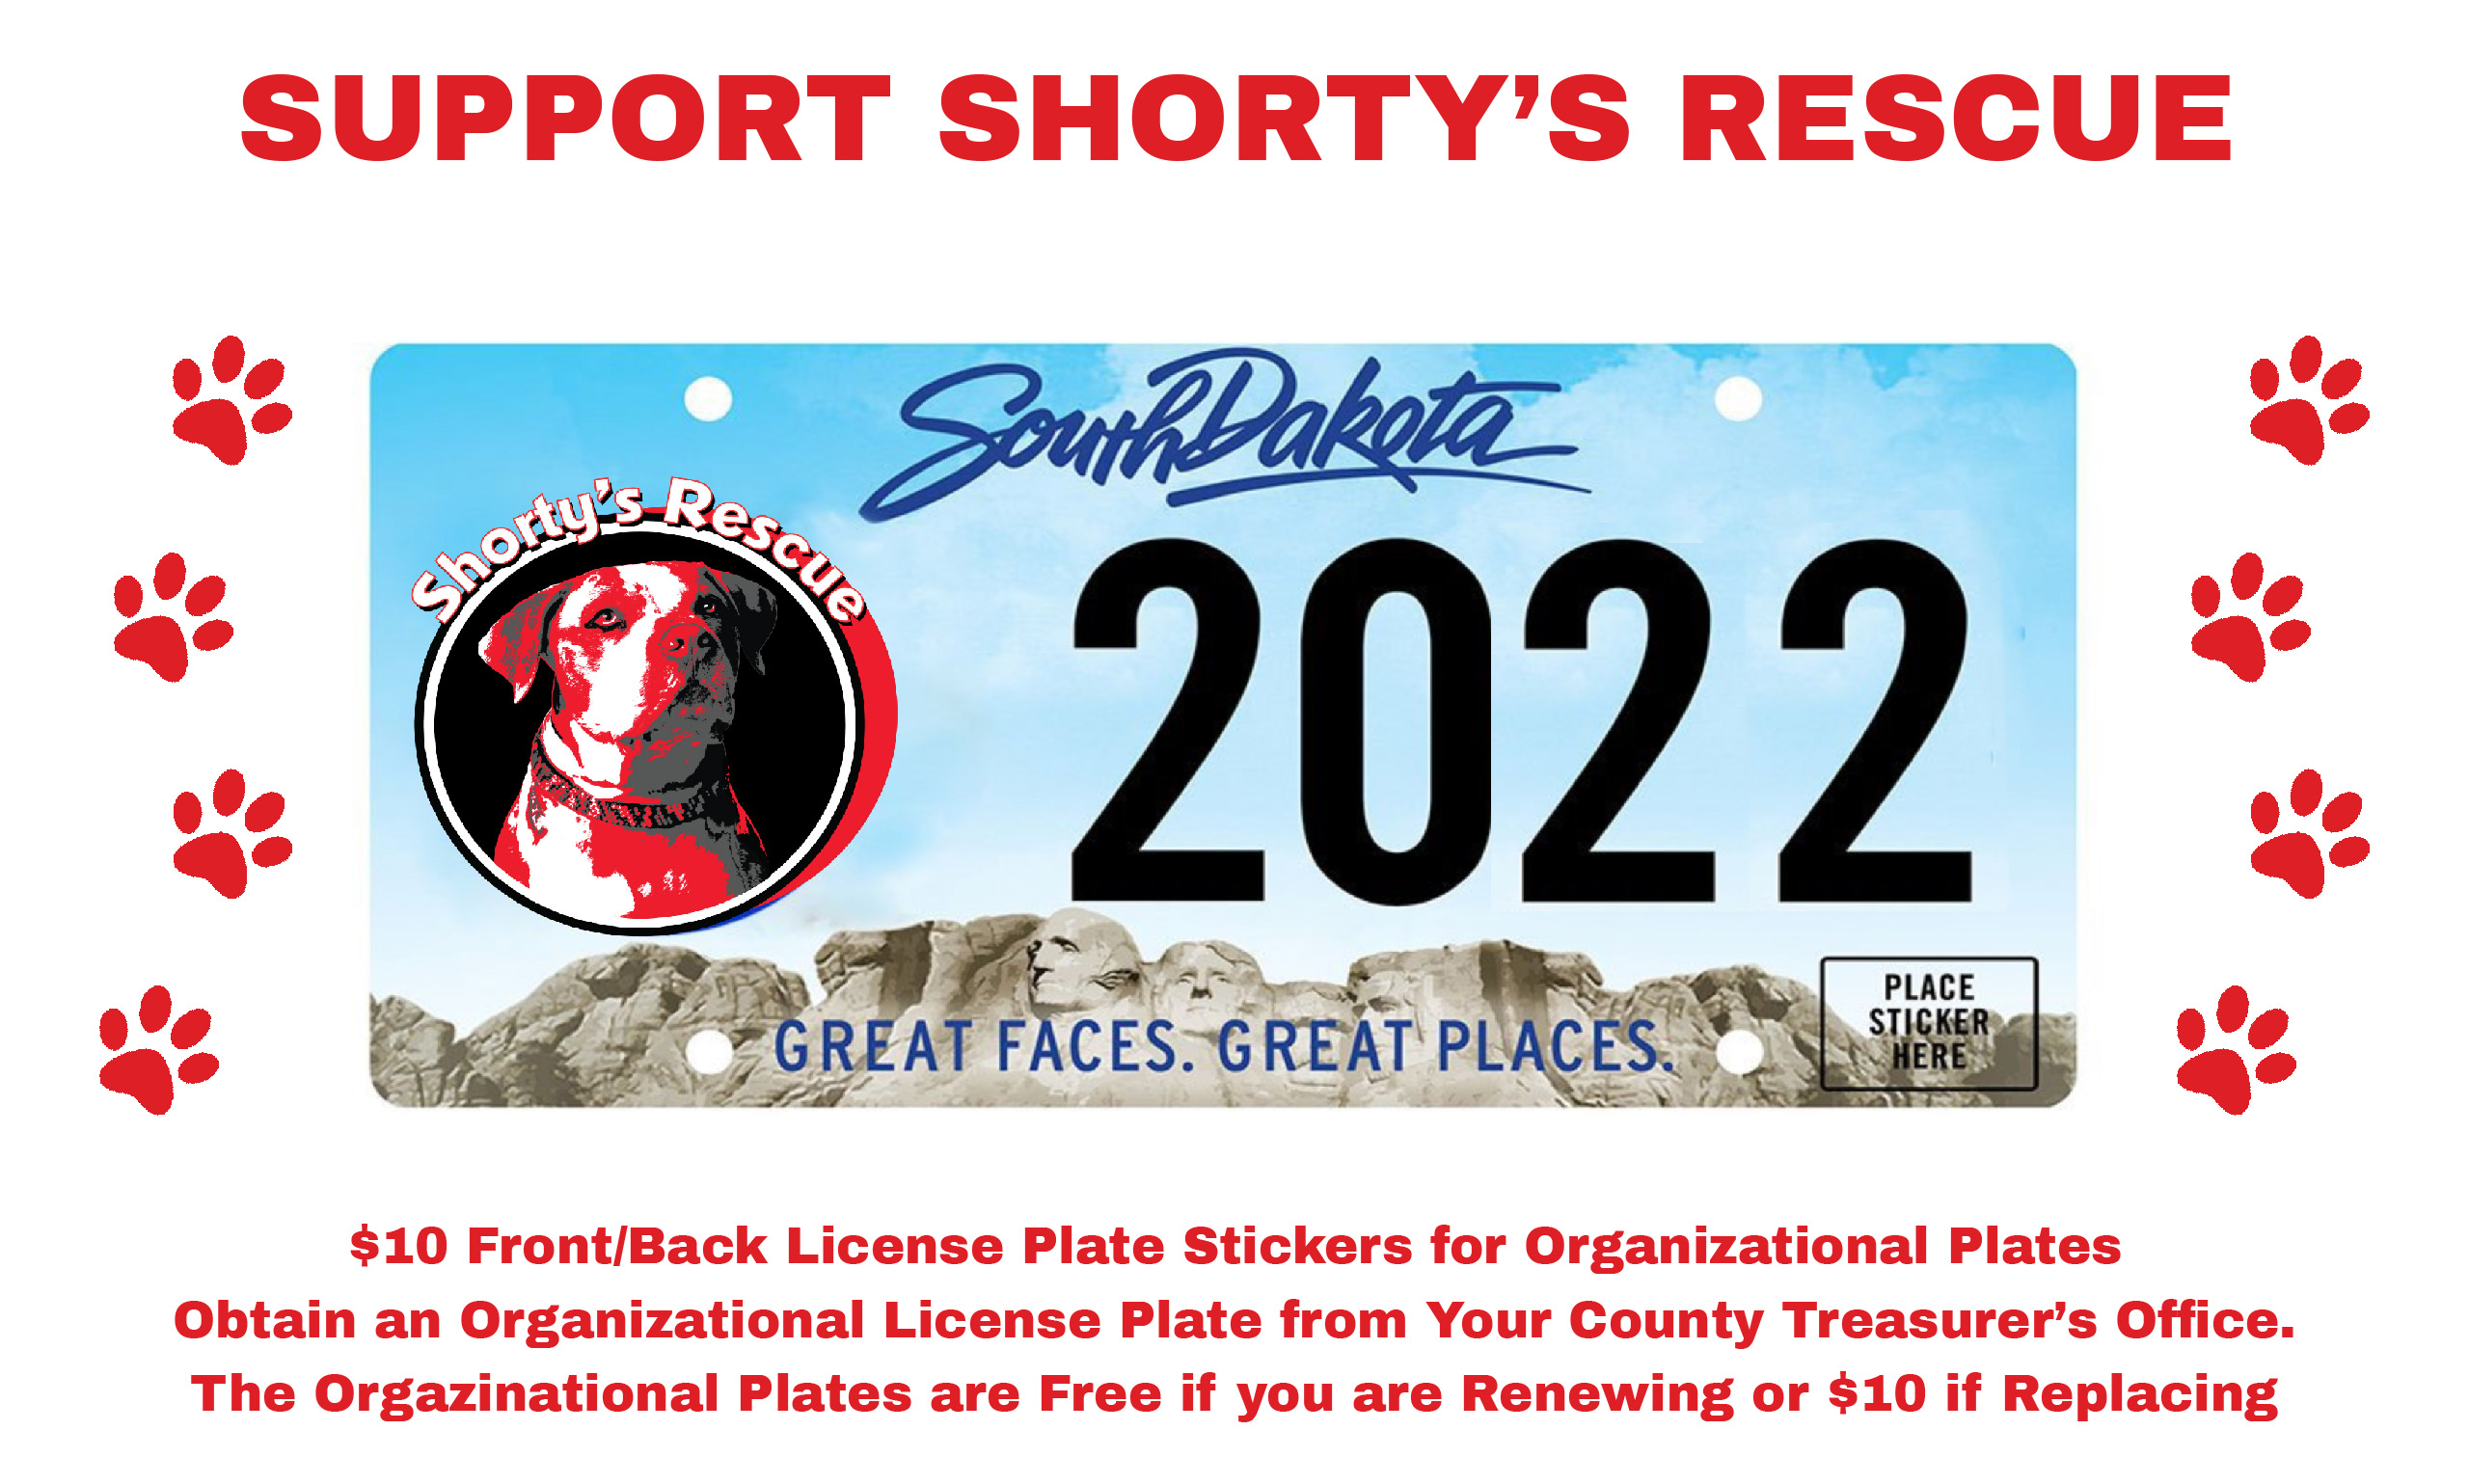 SD License Plates to Support Shorty's Rescue